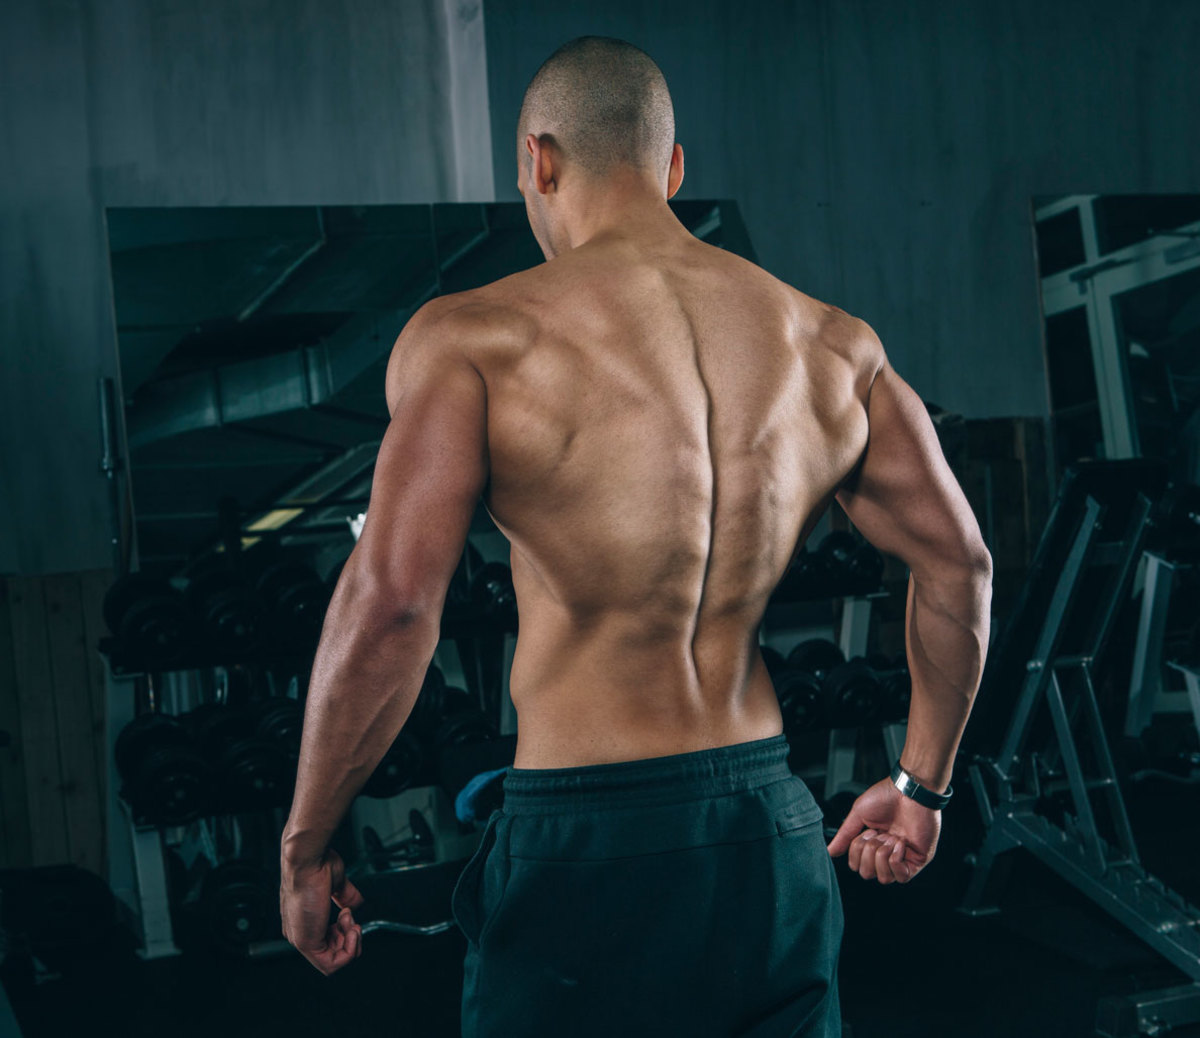 The Pull-Up That Looks Easy But Blasts Your Back